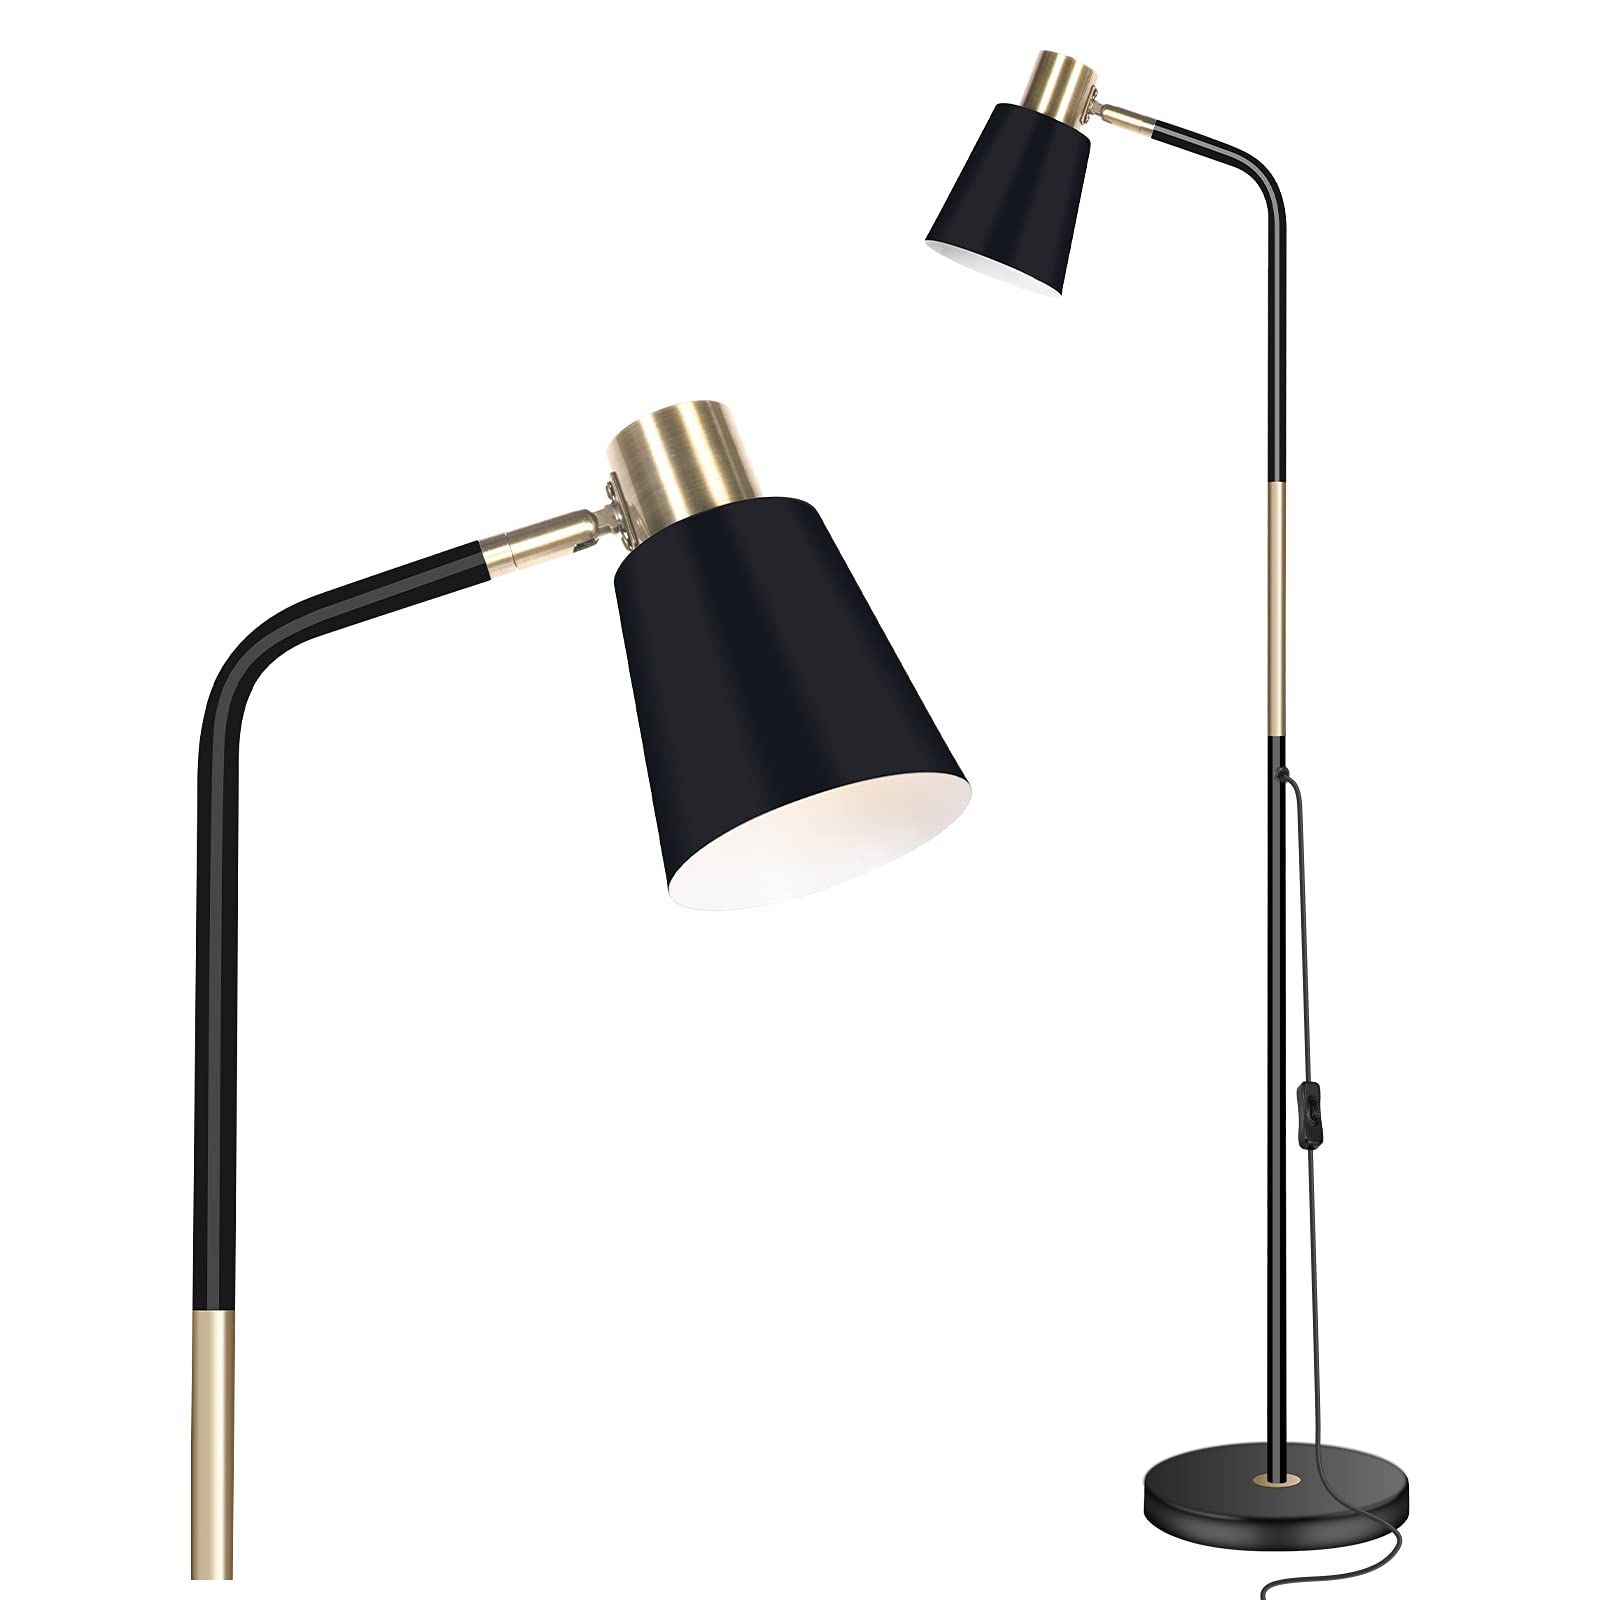 Adjustable Height Standing Lamps Throughout Well Known Niosta Floor Lamp, Industrial Floor Lamp Height Adjustable 360°rotation  Lampshade Modern Standing Lamp, Floor (View 2 of 10)